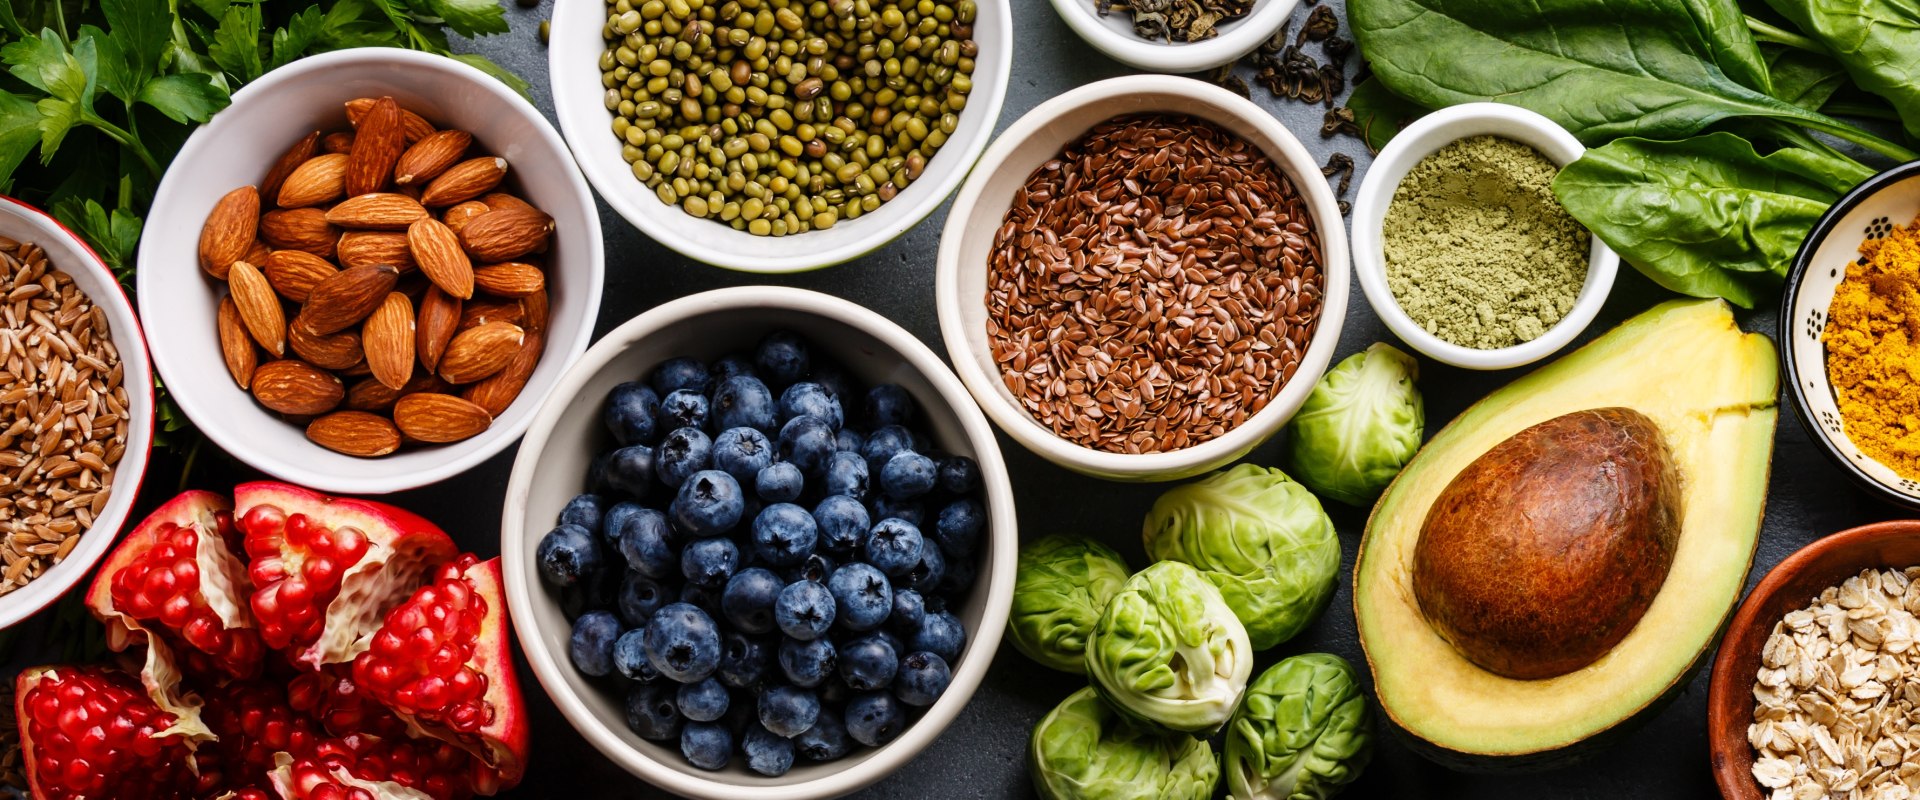 What is the healthiest superfood?